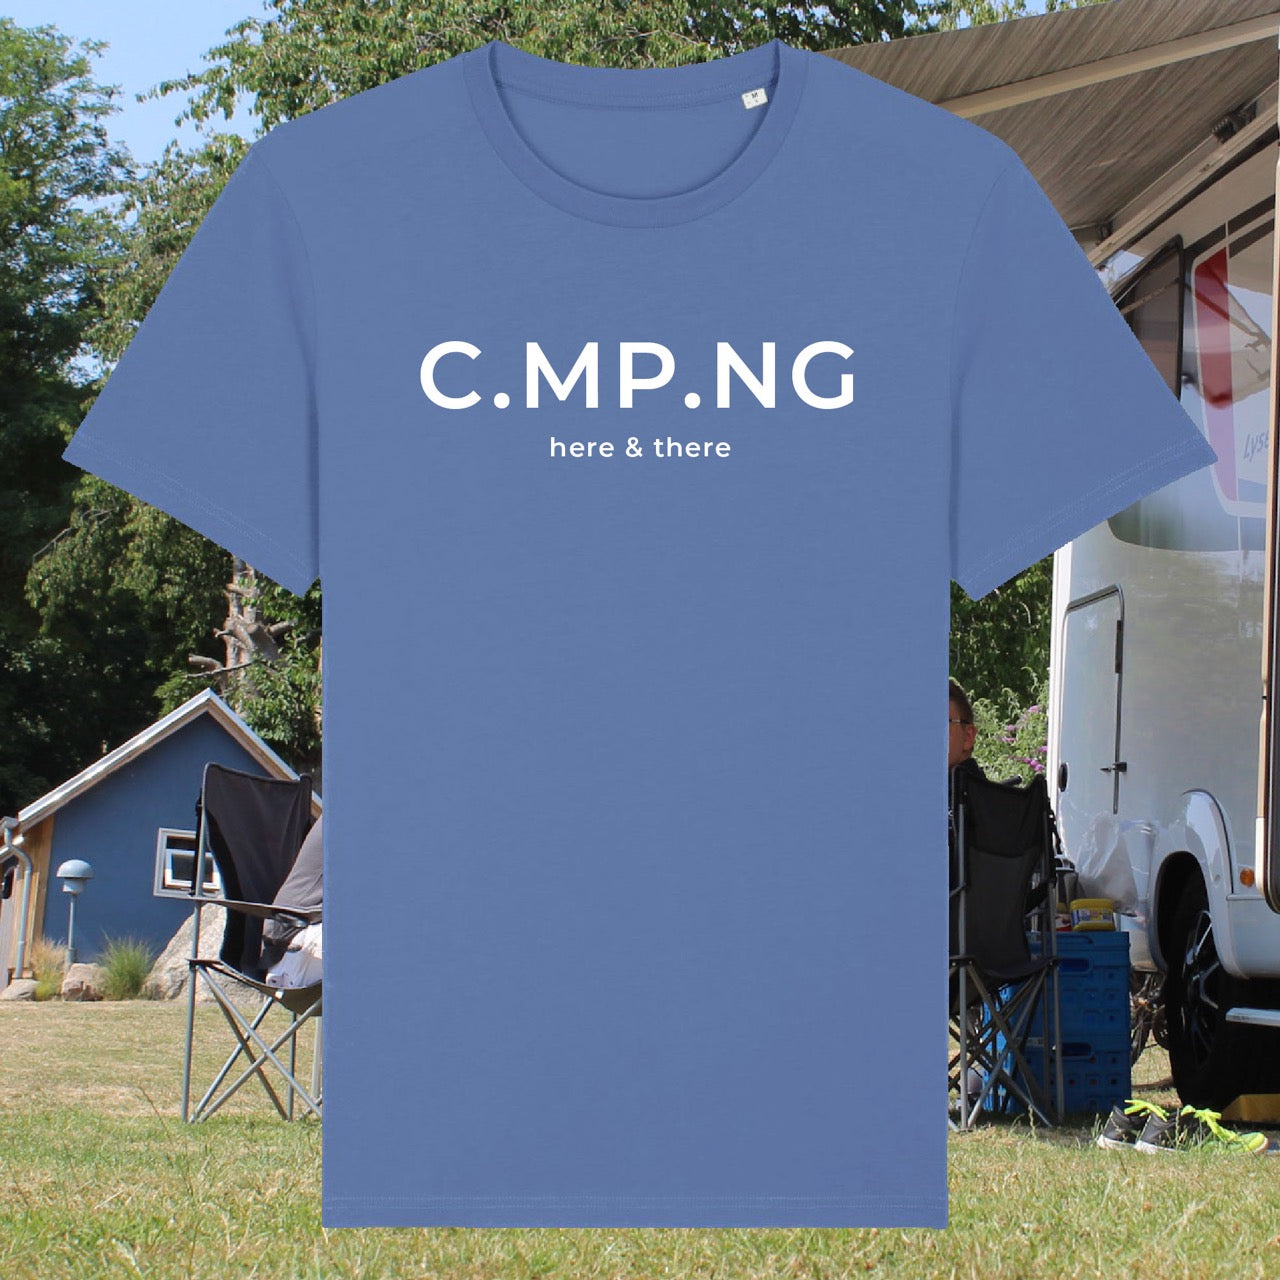 Camping T-Shirt in mittelblau mit weißem Frontprint C.MP.NG here & there